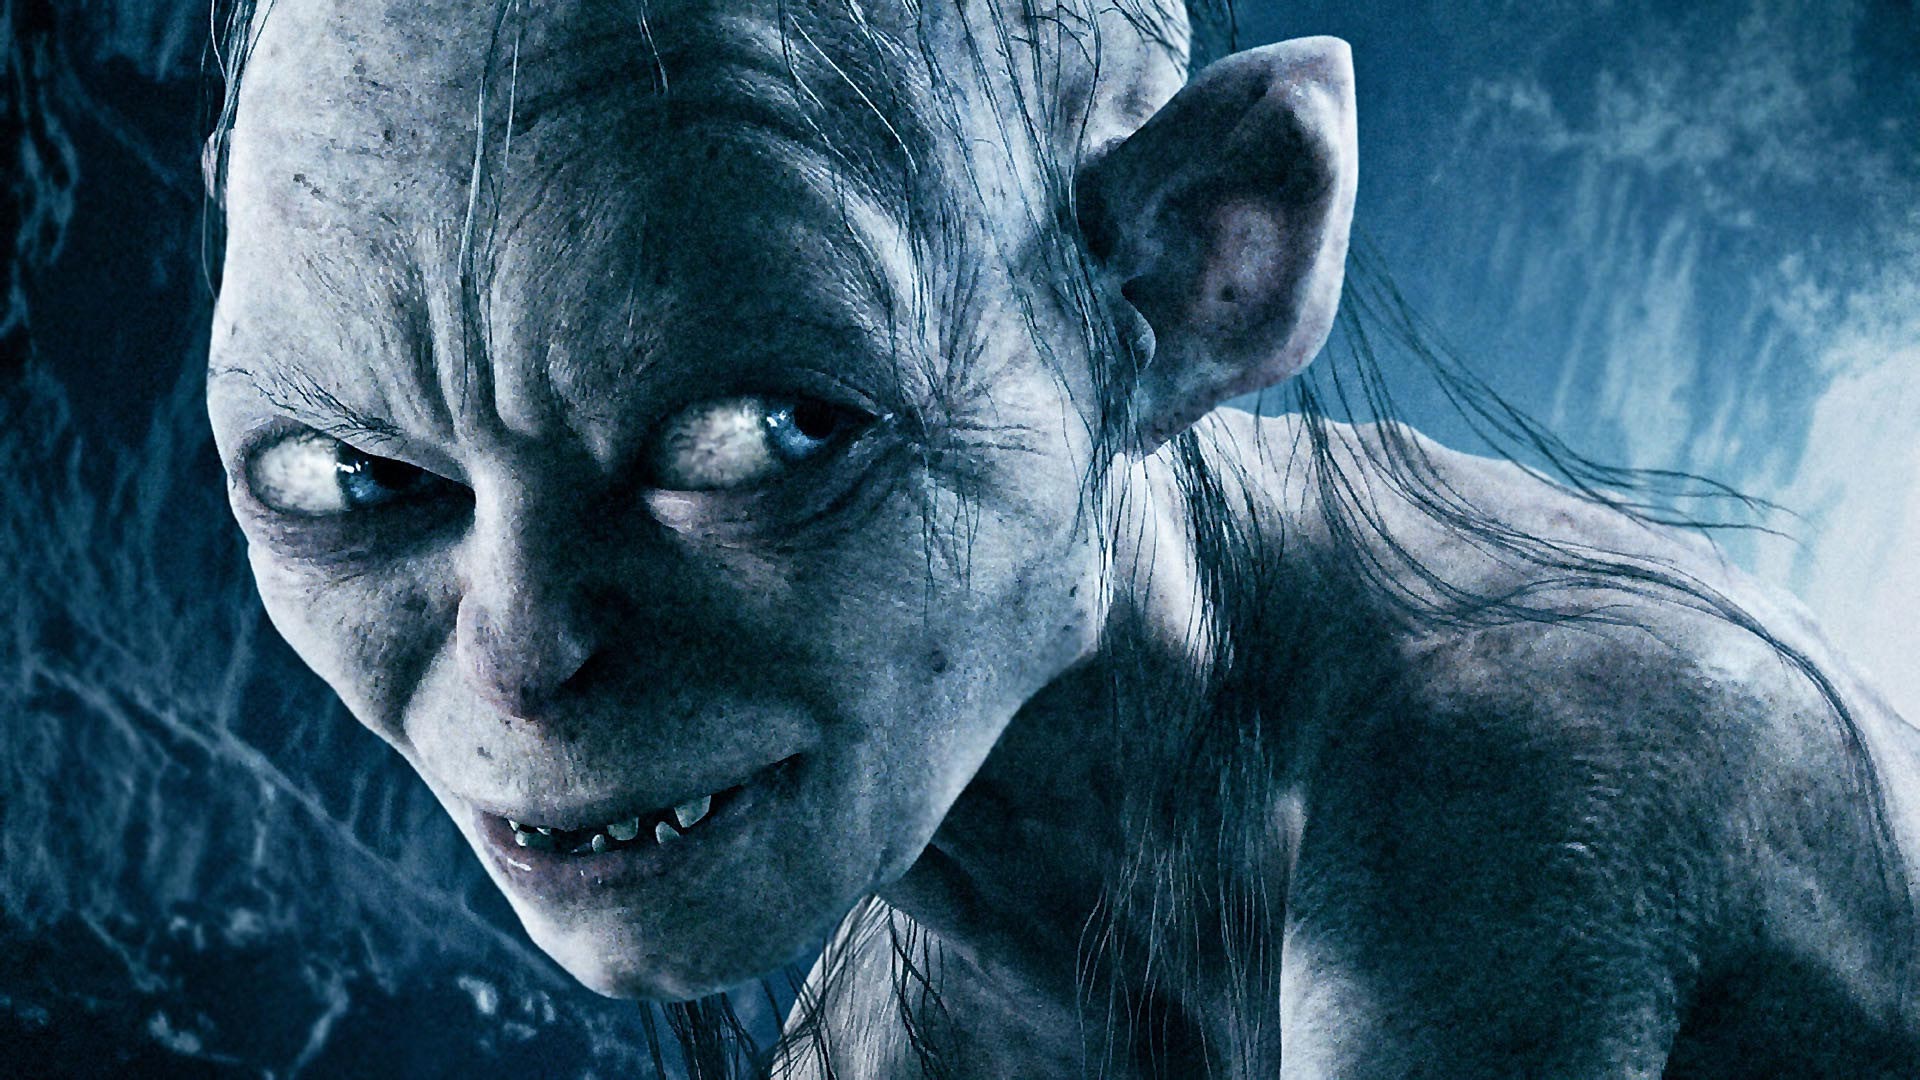 Gollum / Smeagle - From The Lord of The Rings and Hobbit : r